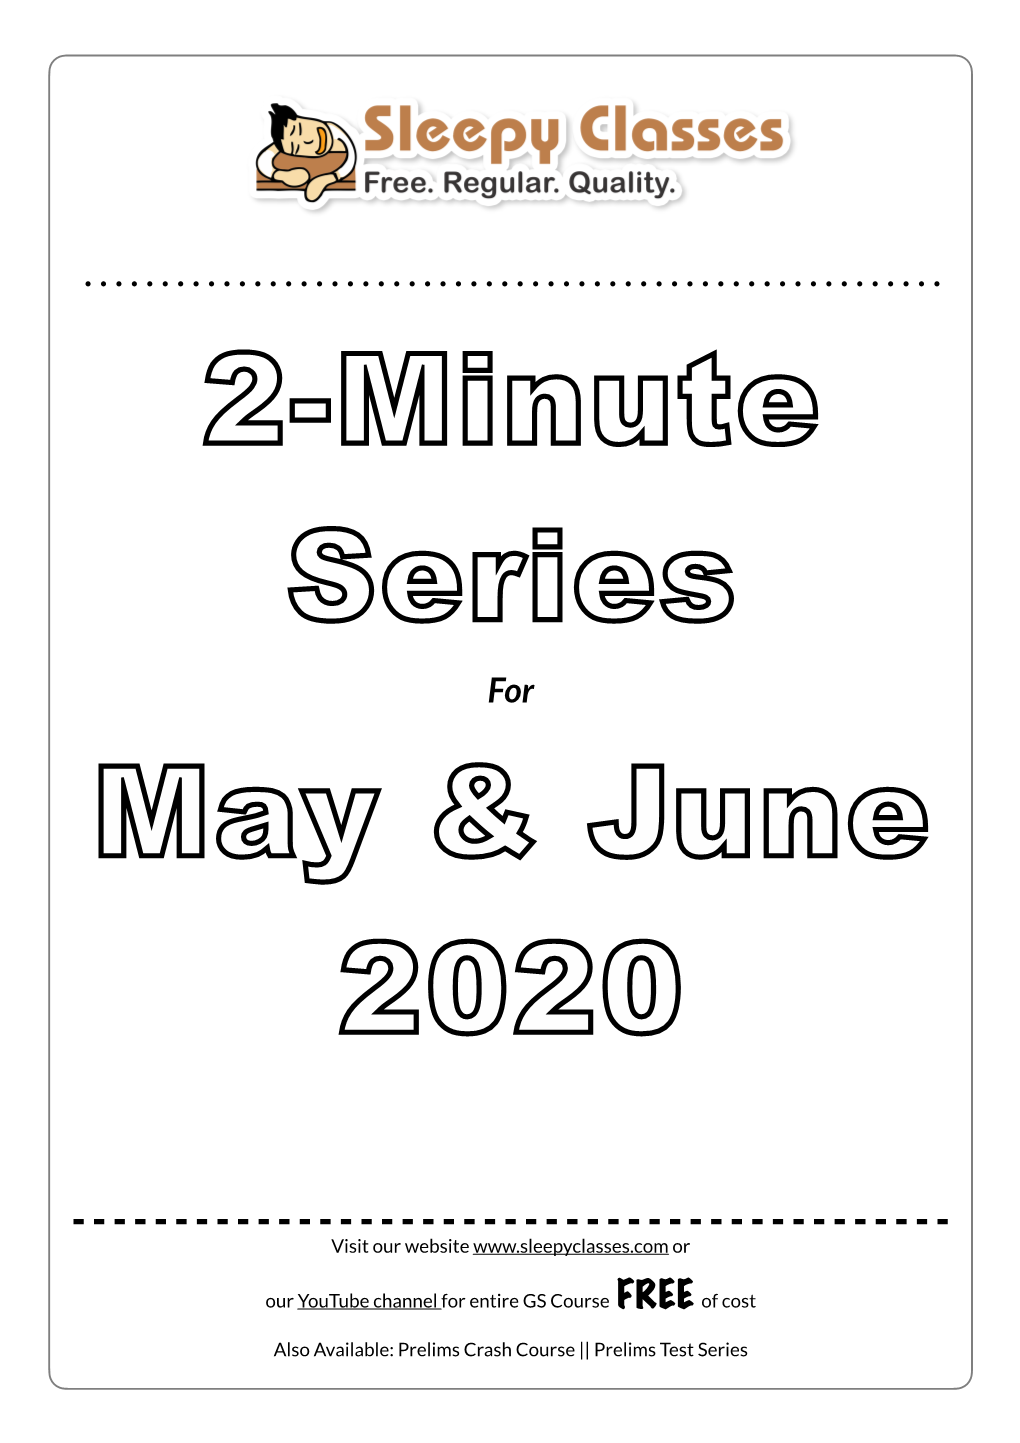 2-Minute Series for May & June 2020